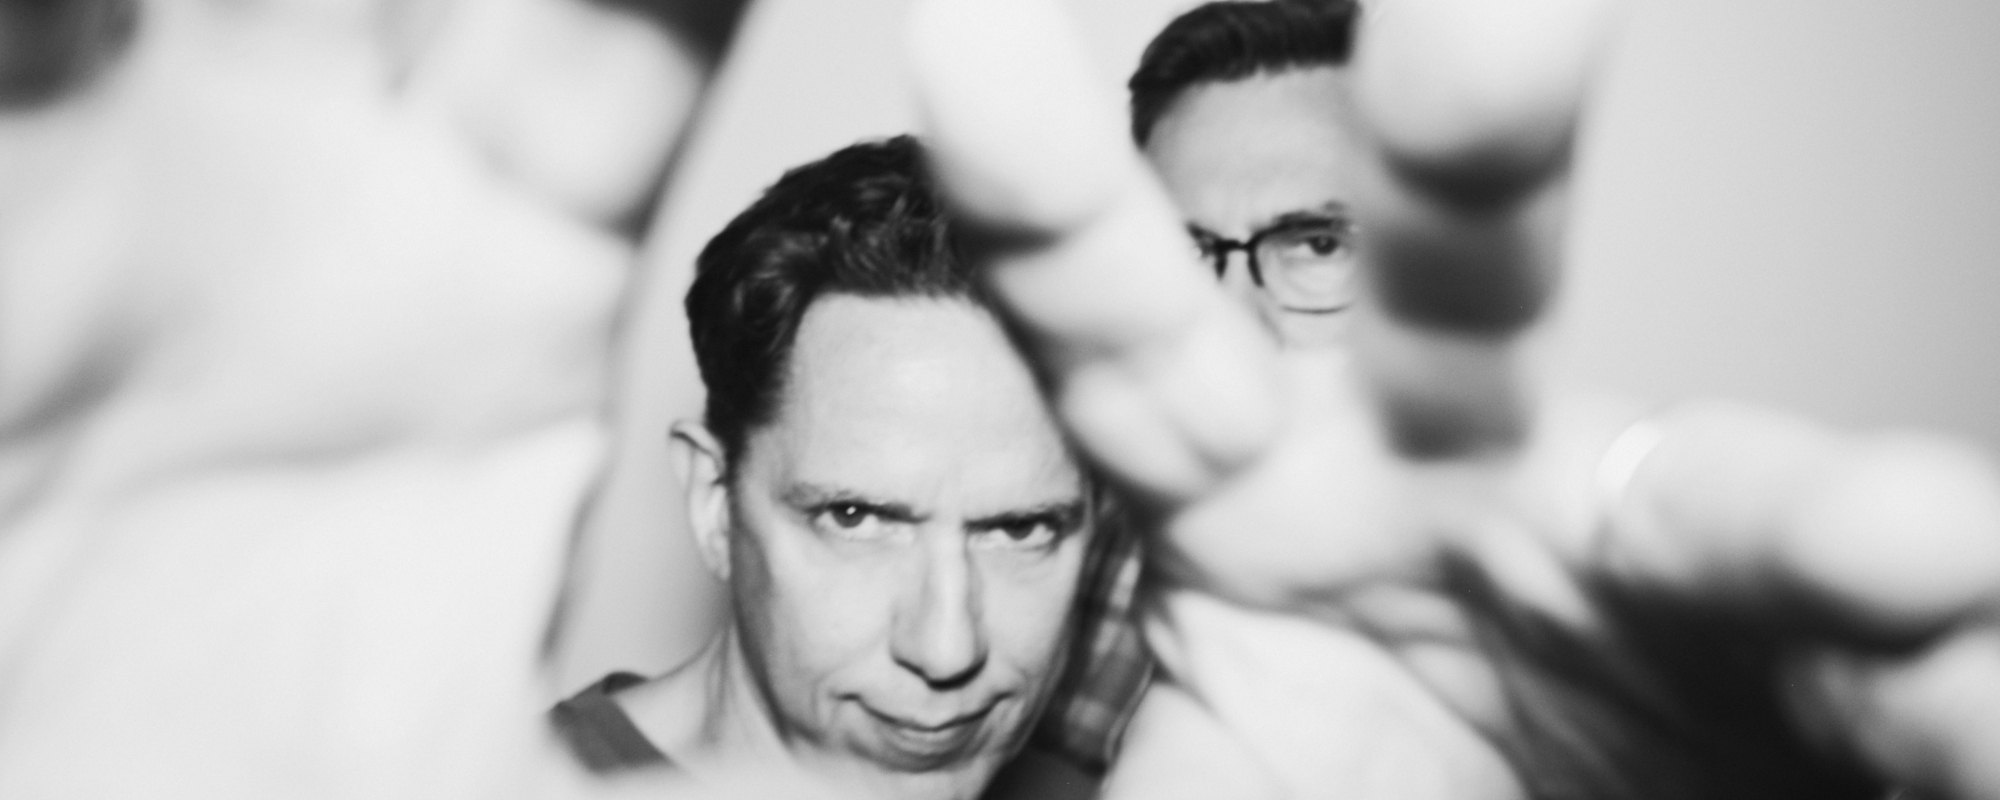 They Might Be Giants Set To Release New Album and Book, ‘Book’